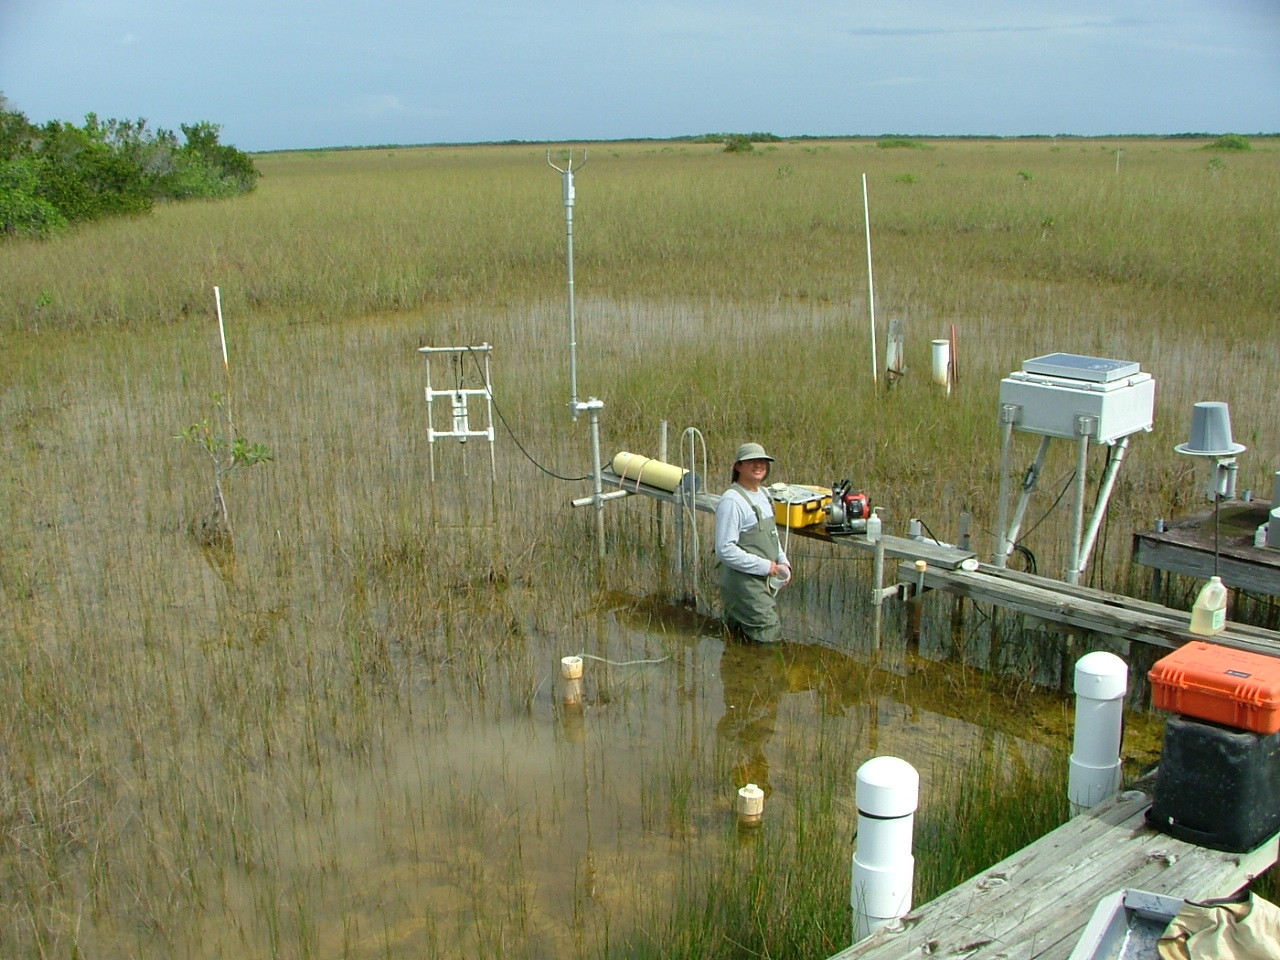 Xavier Zapata (Florida International University Graduate Student) collecting a ground water sample at TS/Ph-3 in Taylor Slough